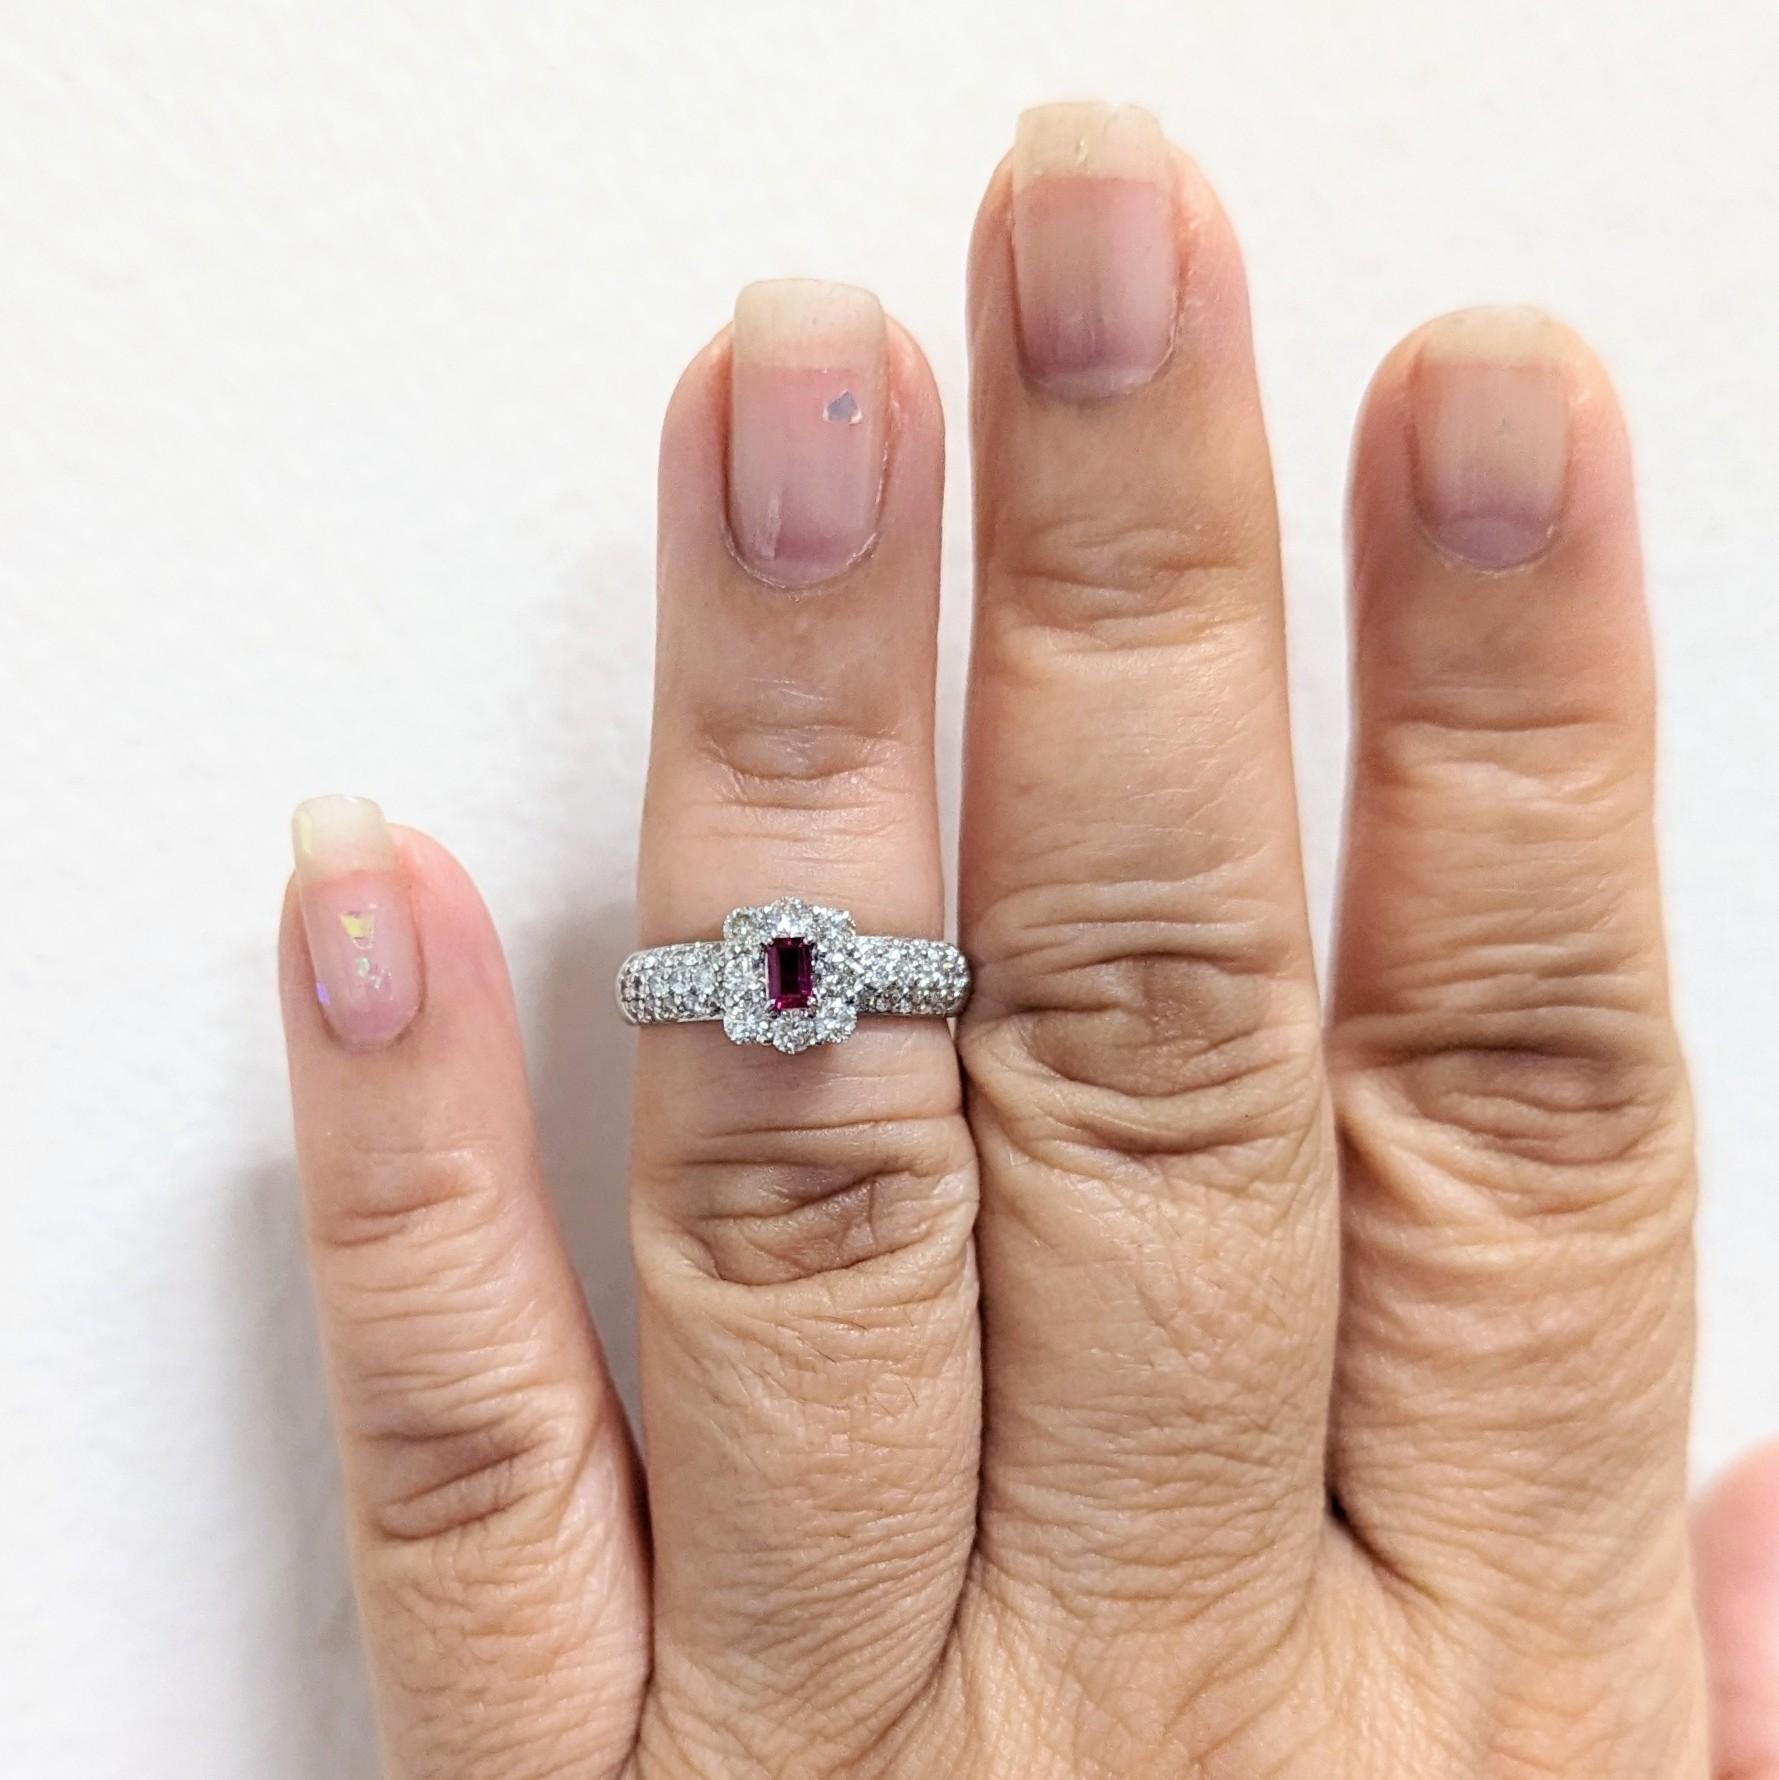 Beautiful 0.18 ct. red ruby emerald cut with 0.86 ct. good quality white diamond rounds.  Handmade in platinum.  Ring size 6.75.